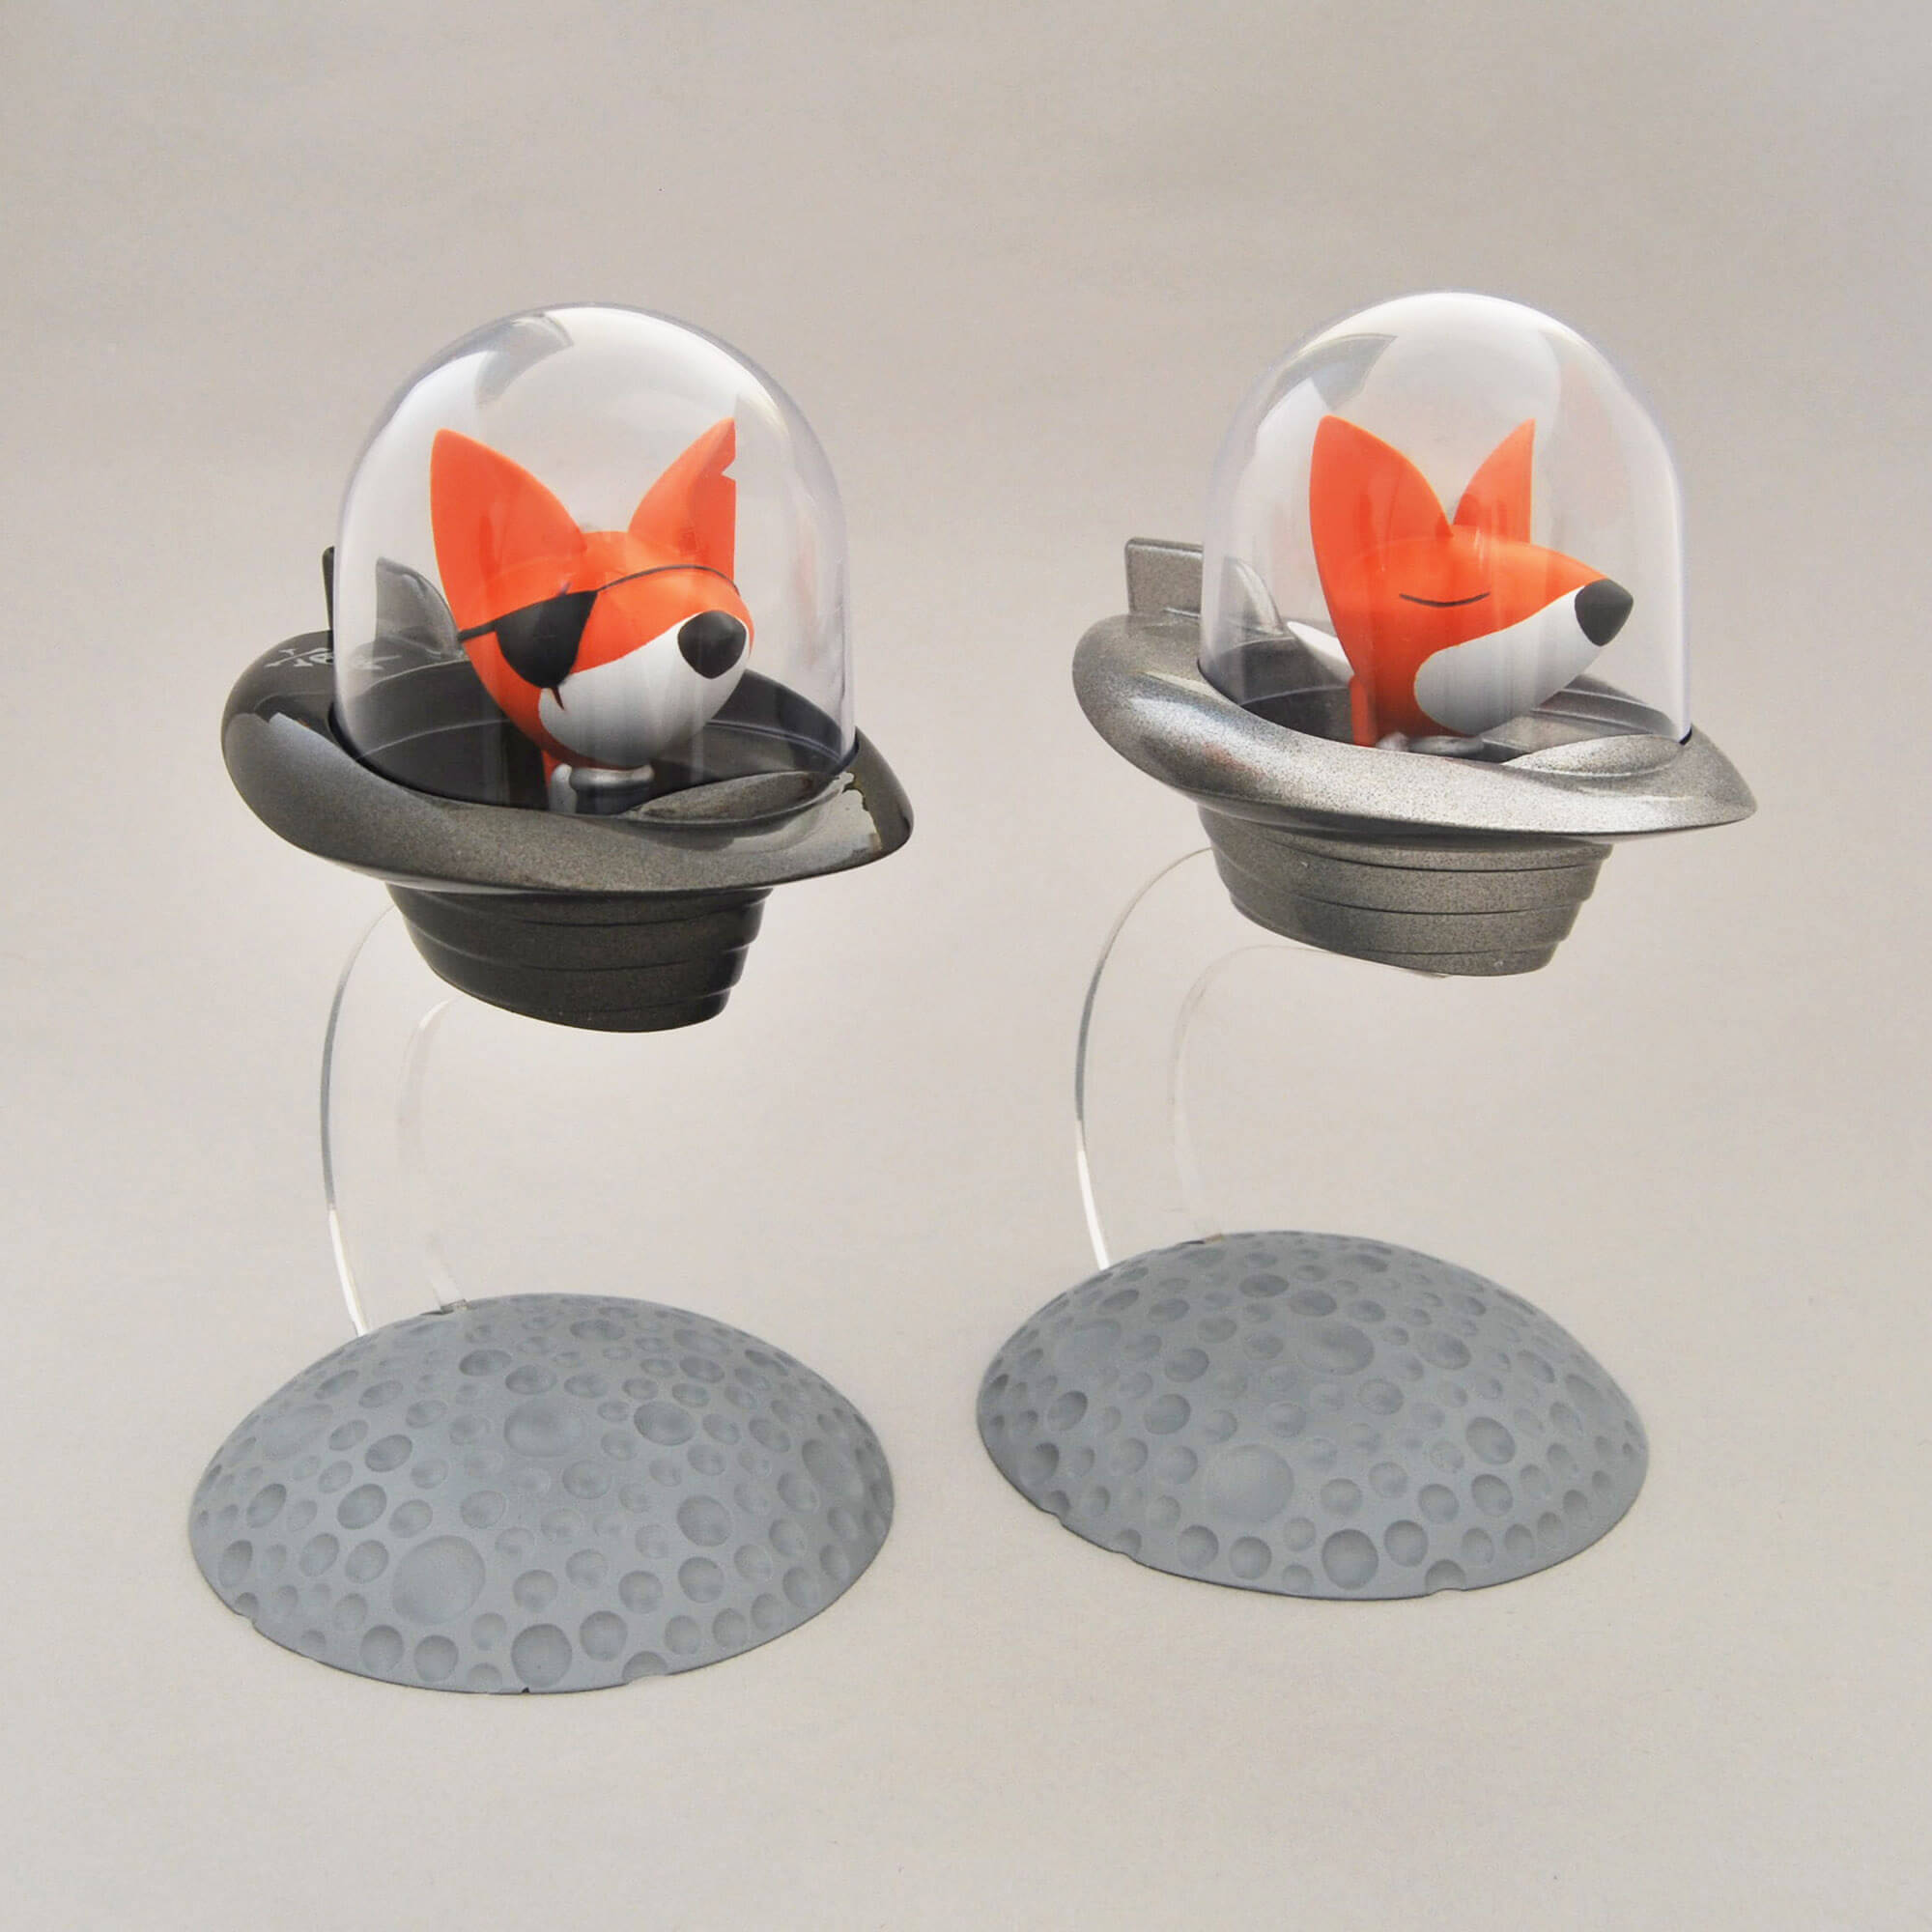 Pirate Cosmonaut Moon Foxes by Robotic Industries & Sergey Safonov 4